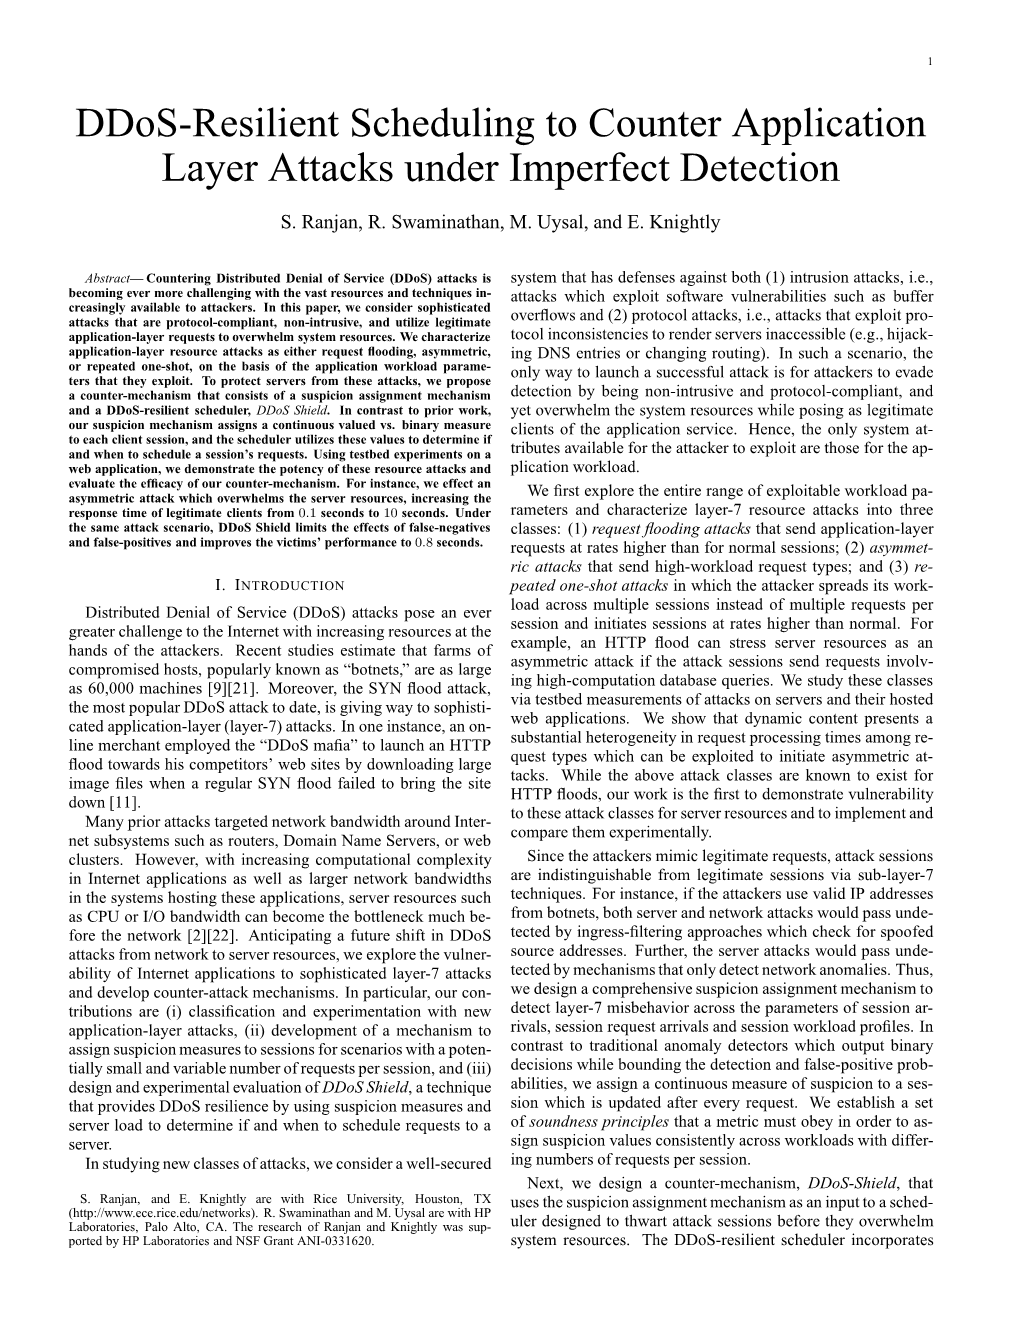 Ddos-Resilient Scheduling to Counter Application Layer Attacks Under Imperfect Detection